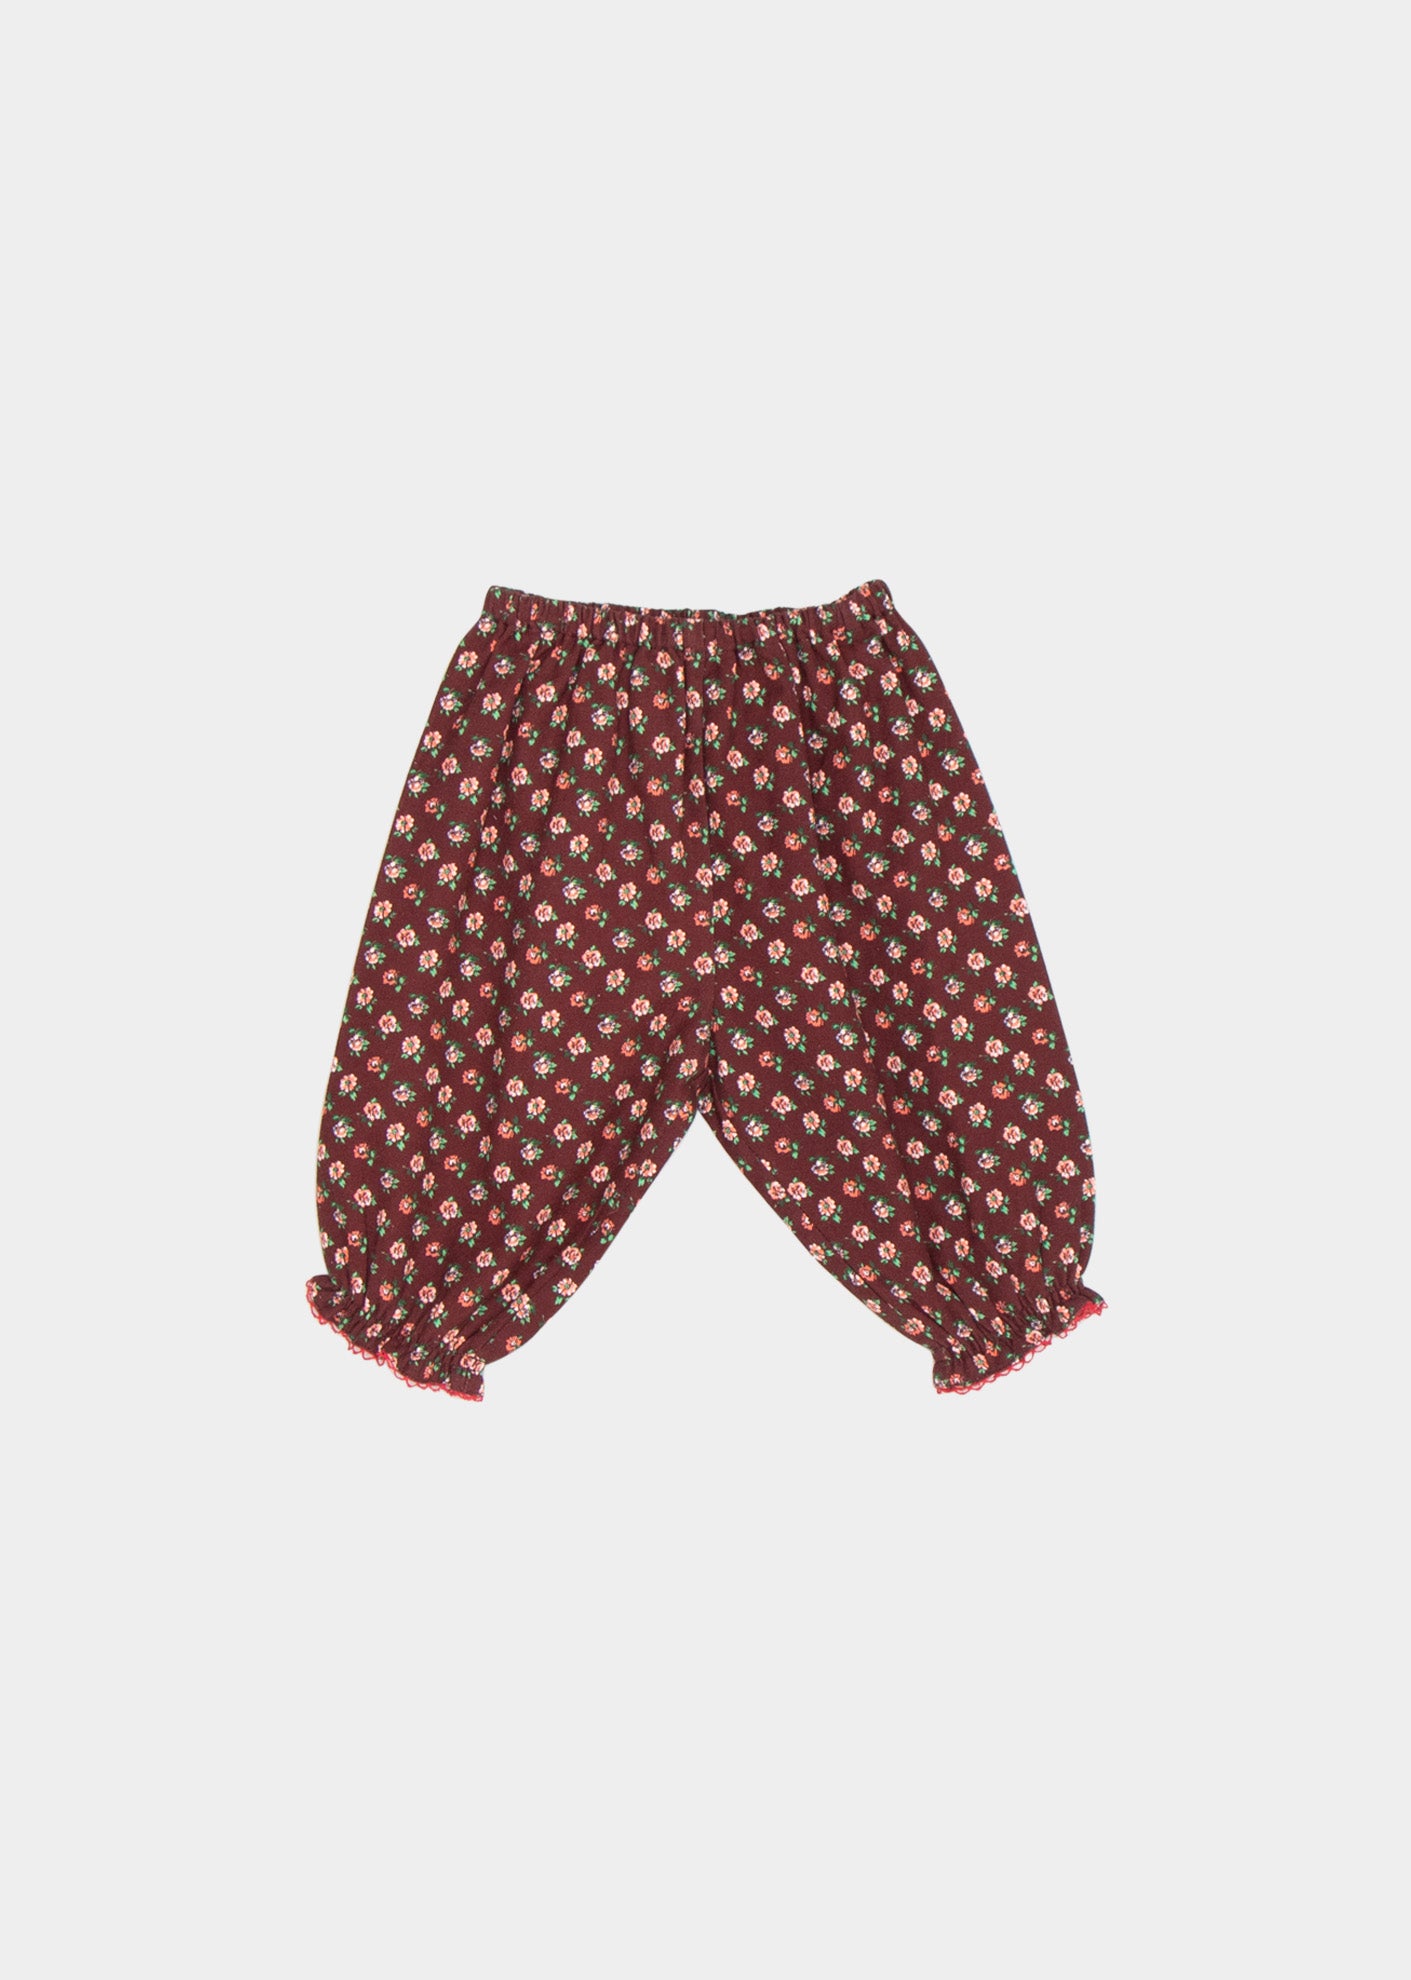 ARNICA BABY TROUSER - CHOCOLATE FLORAL